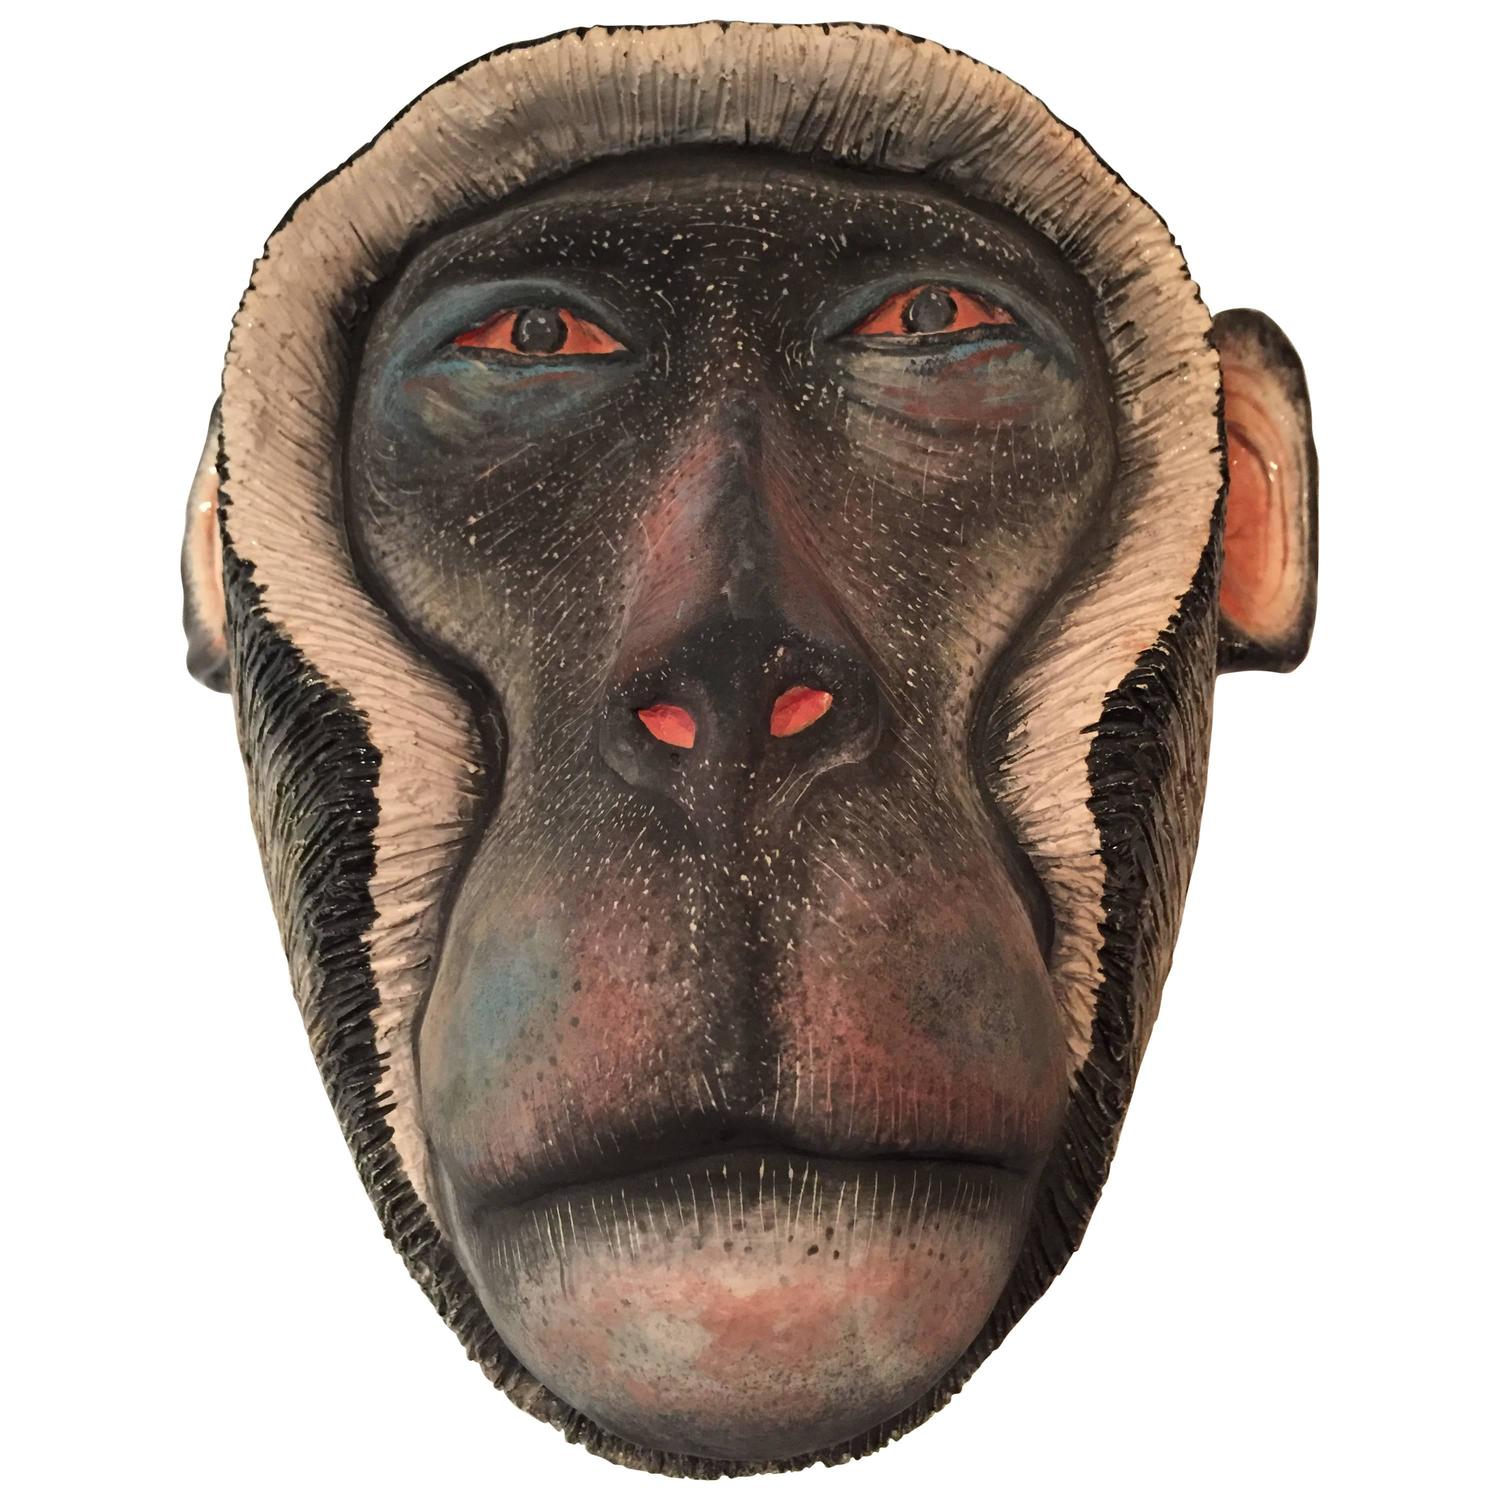 Monkey Mask Ceramic Sculpture by Ardmore from South Africa For Sale ...